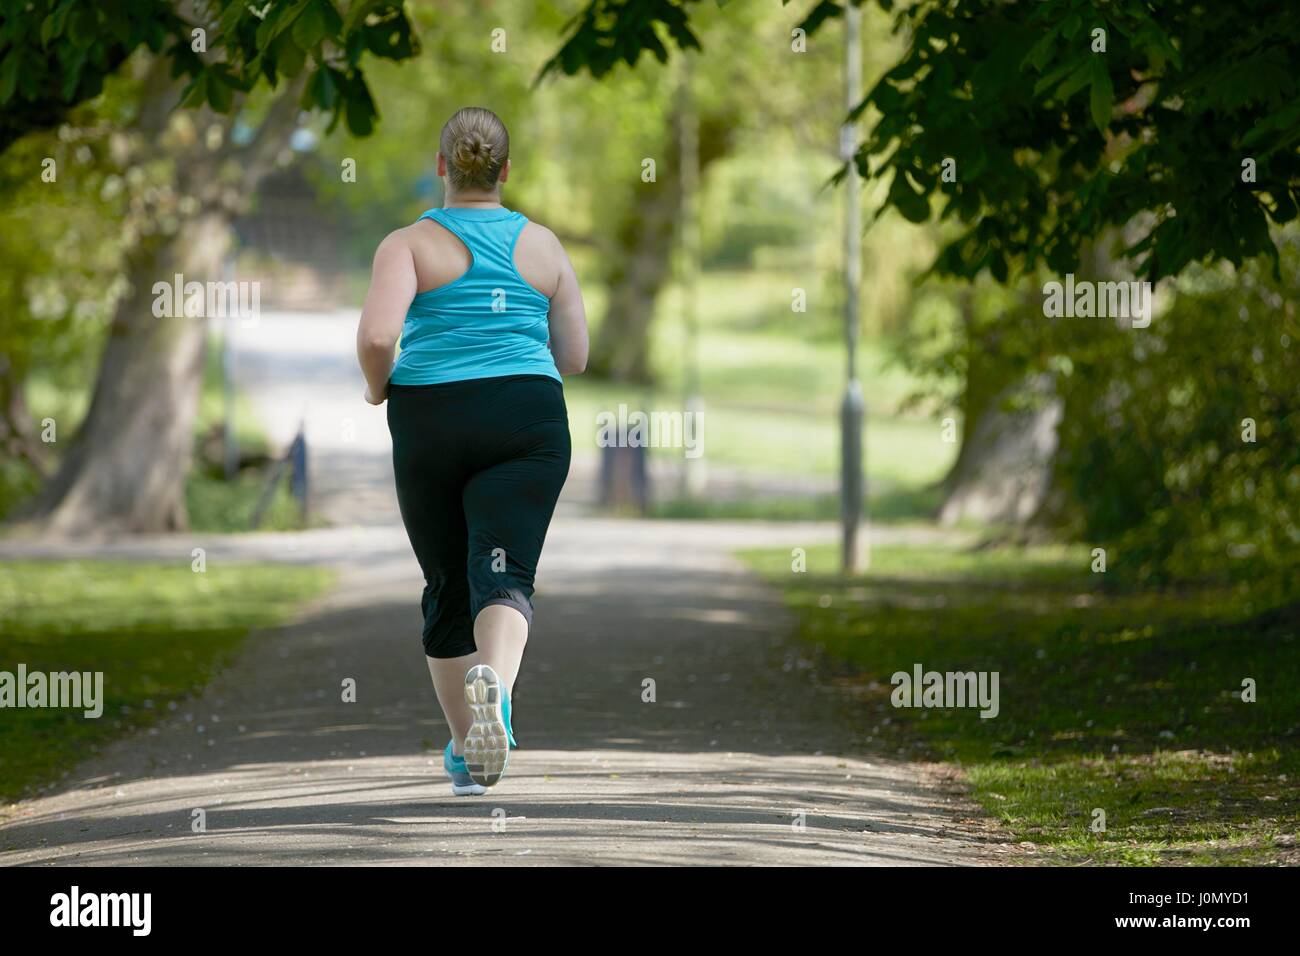 Young woman running on path, rear view. Stock Photo